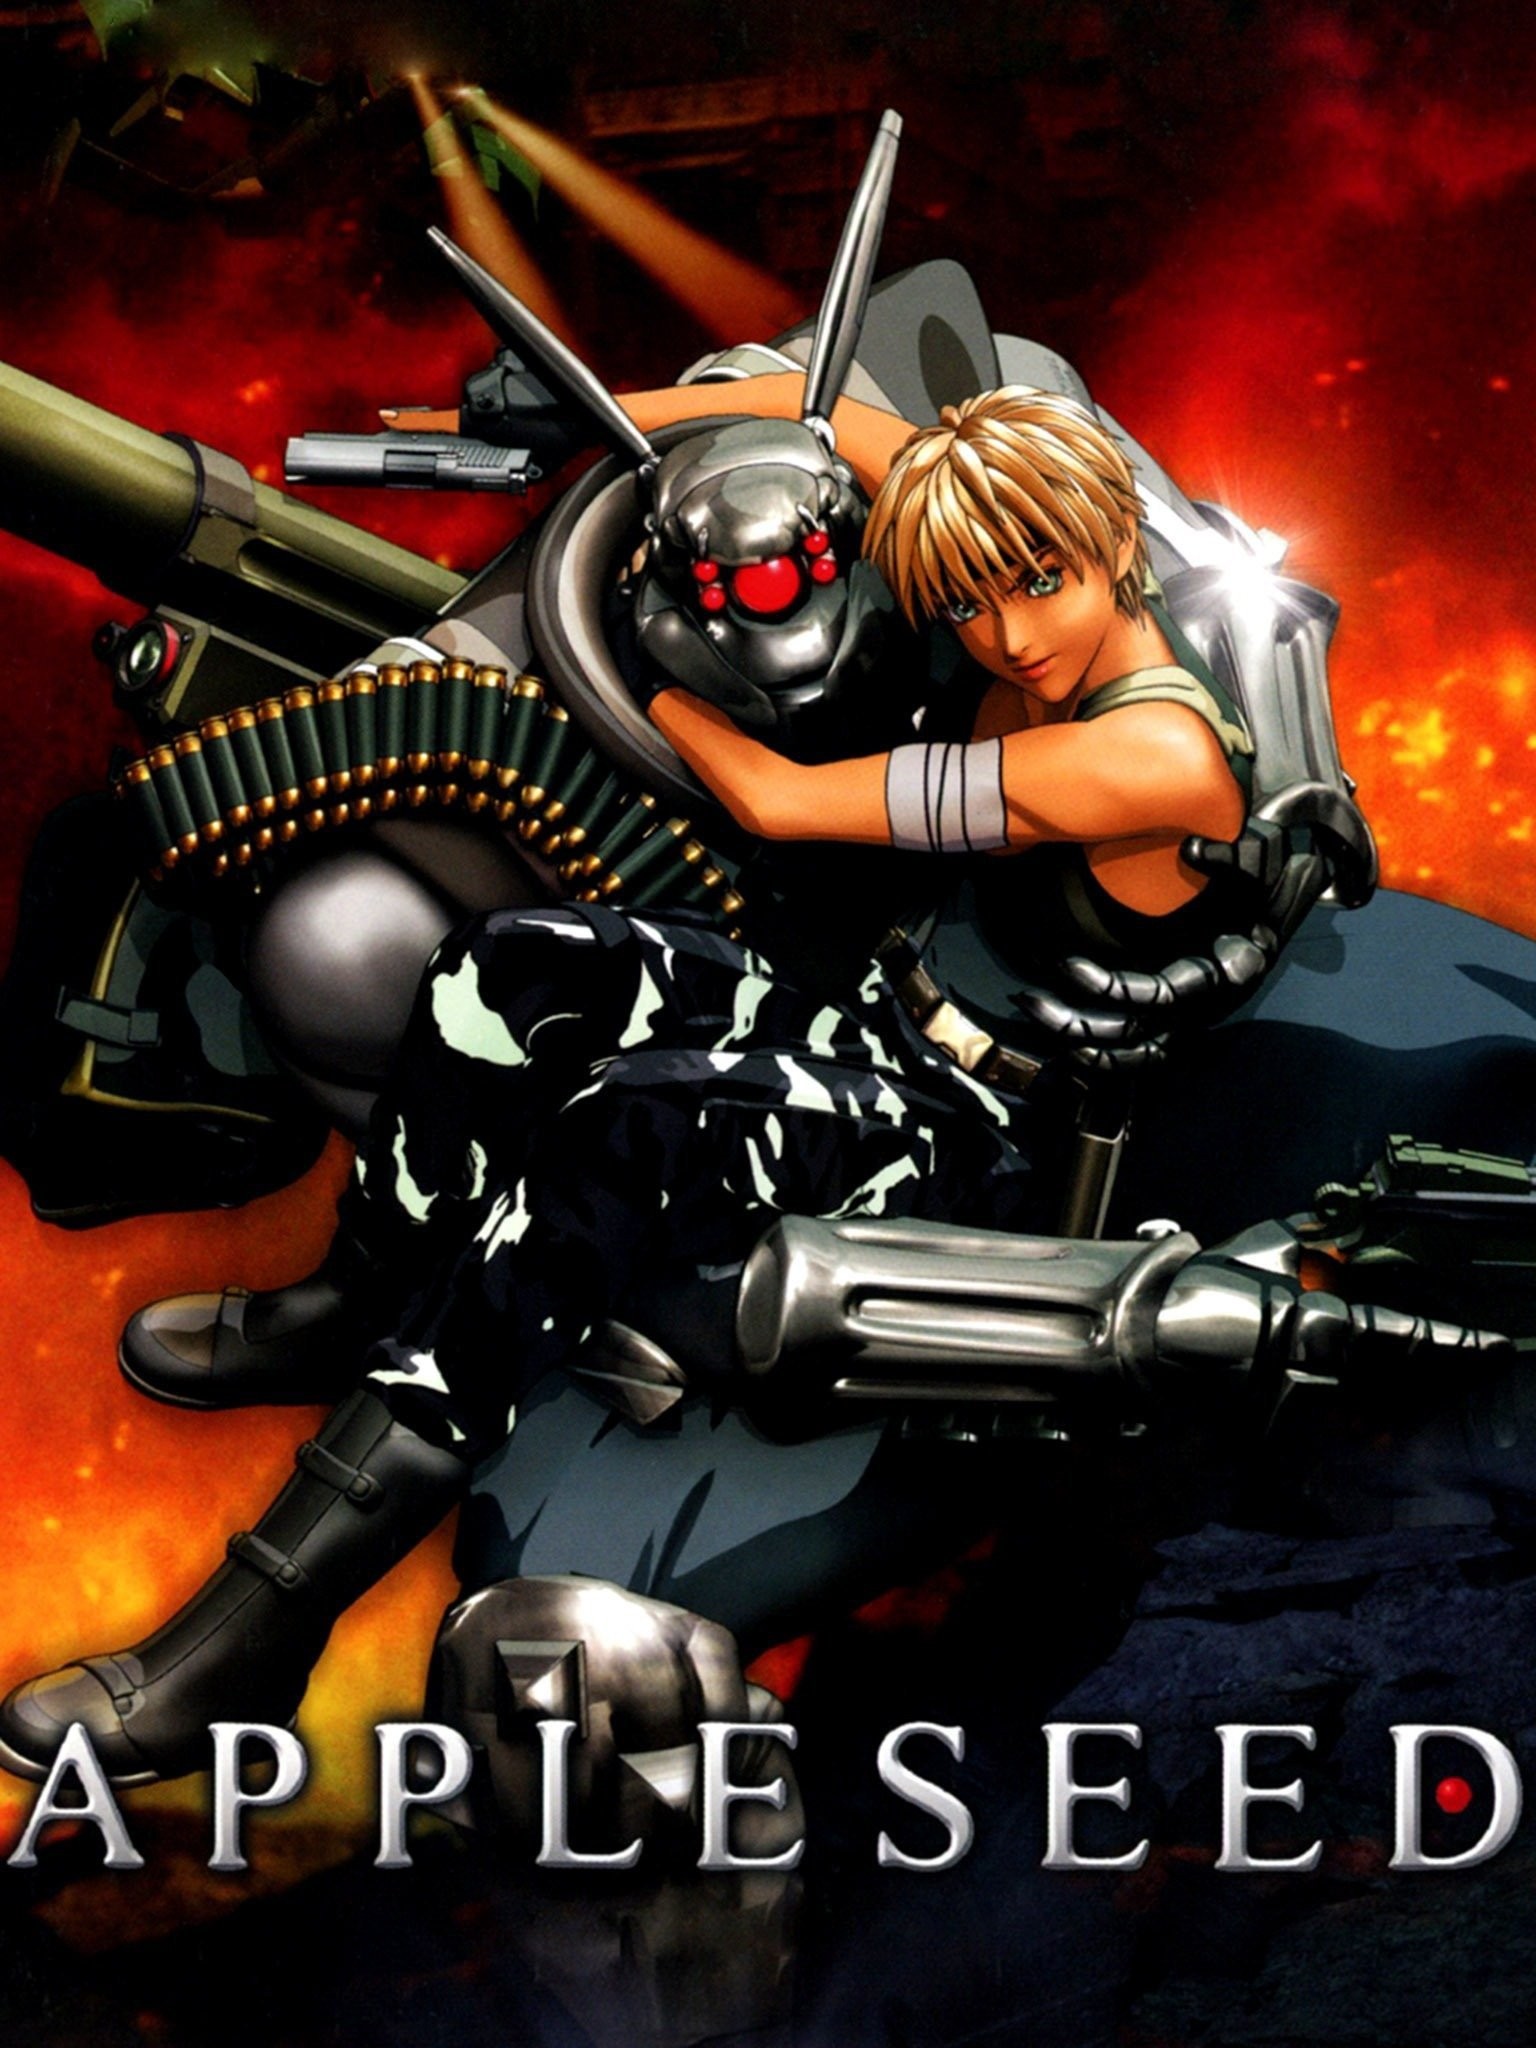 appleseed, apple seed, briareus Wallpaper, HD Anime 4K Wallpapers, Images  and Background - Wallpapers Den